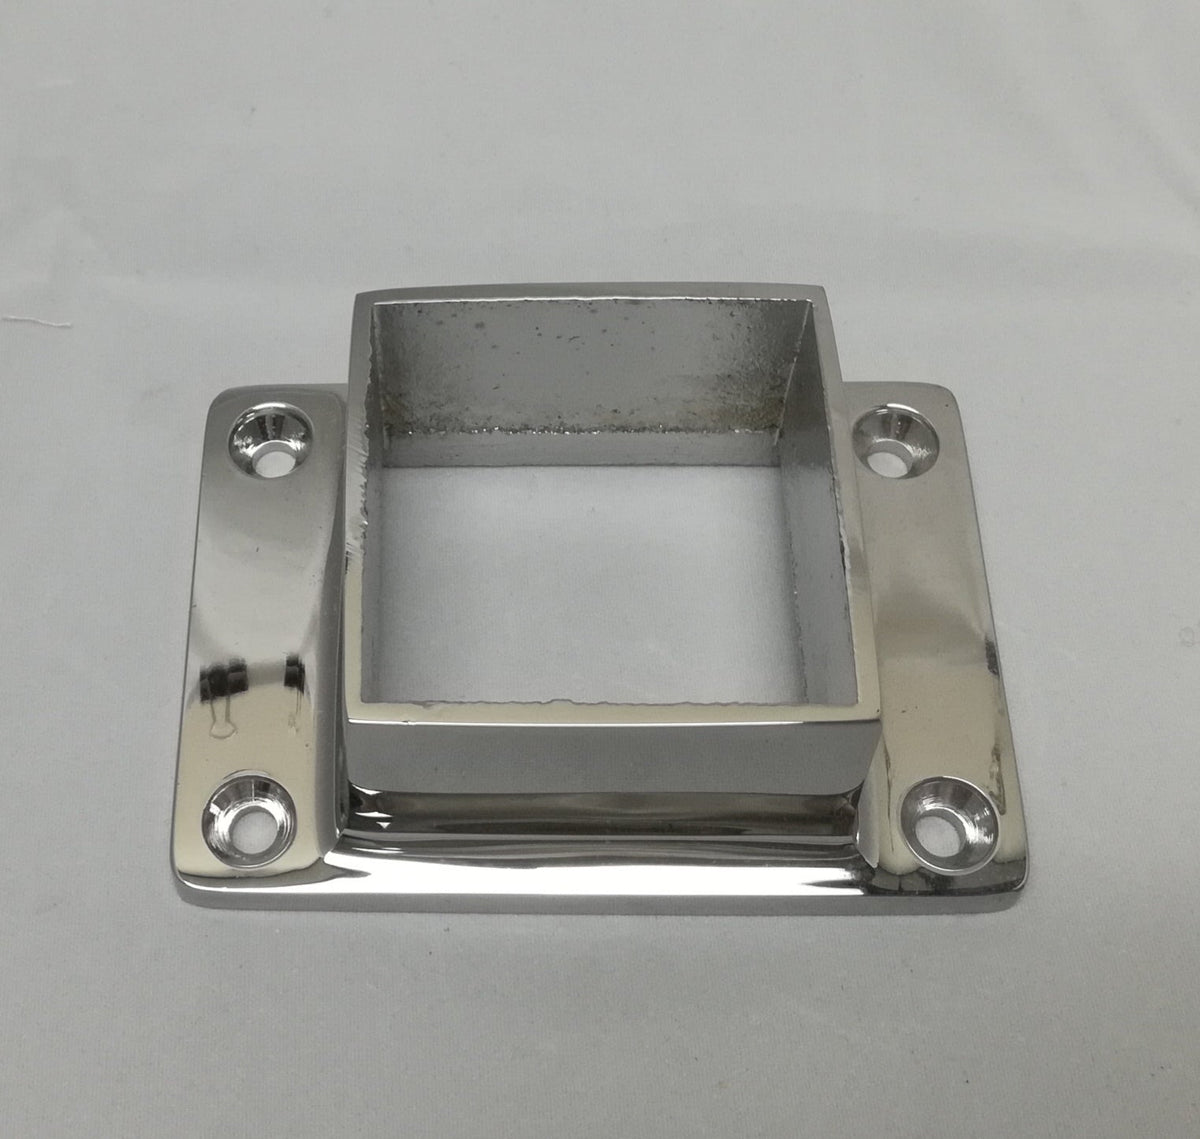 Narrow Flange for 2" Square Tubing - Trade Diversified